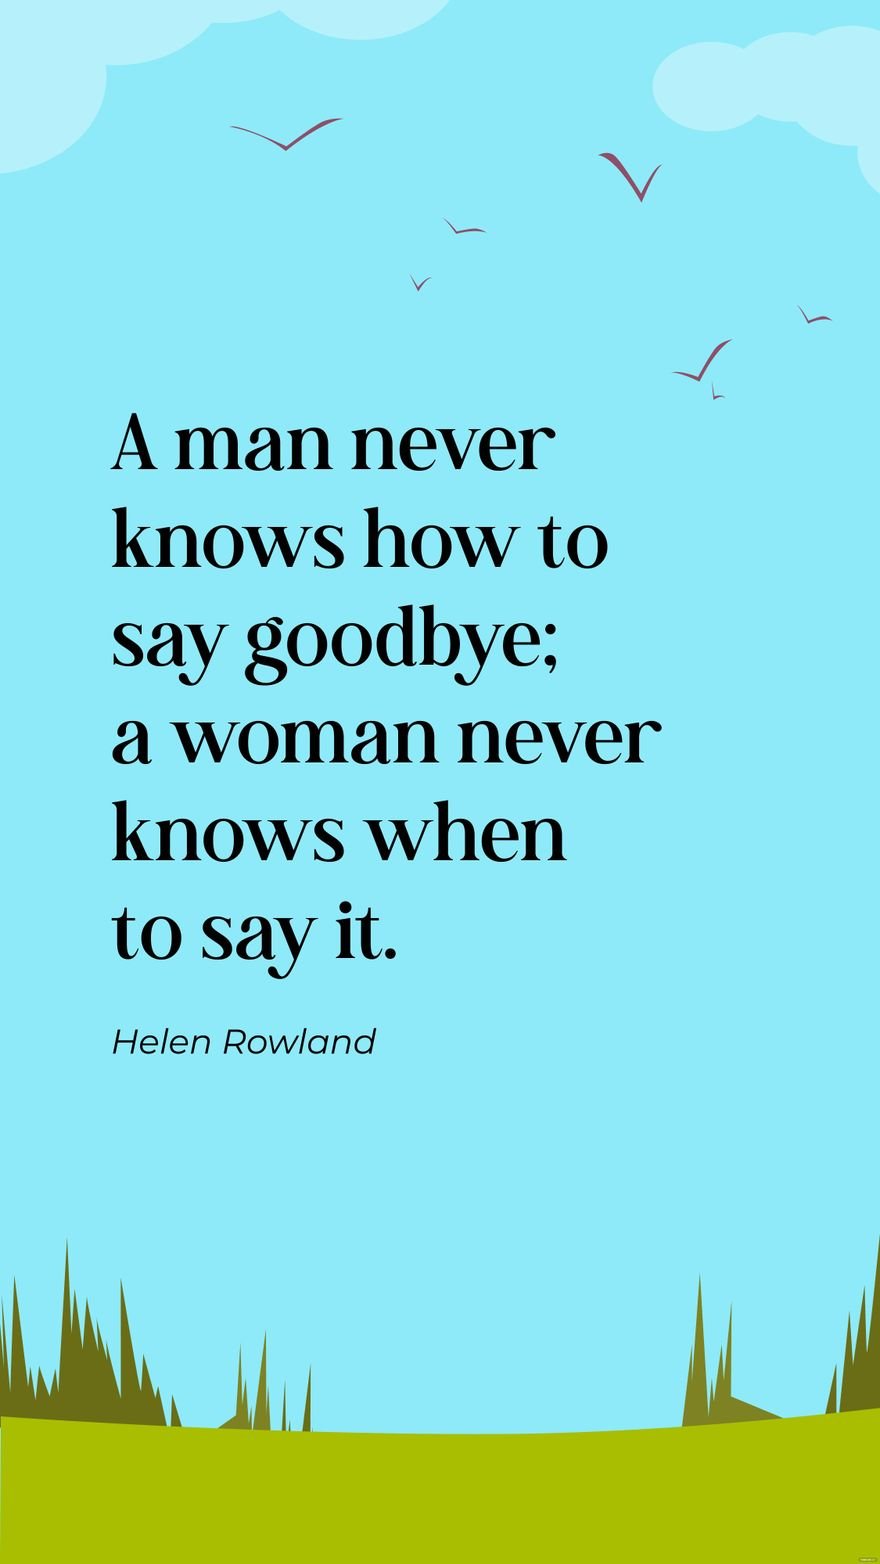 Helen Rowland- A man never knows how to say goodbye; a woman never knows when to say it.